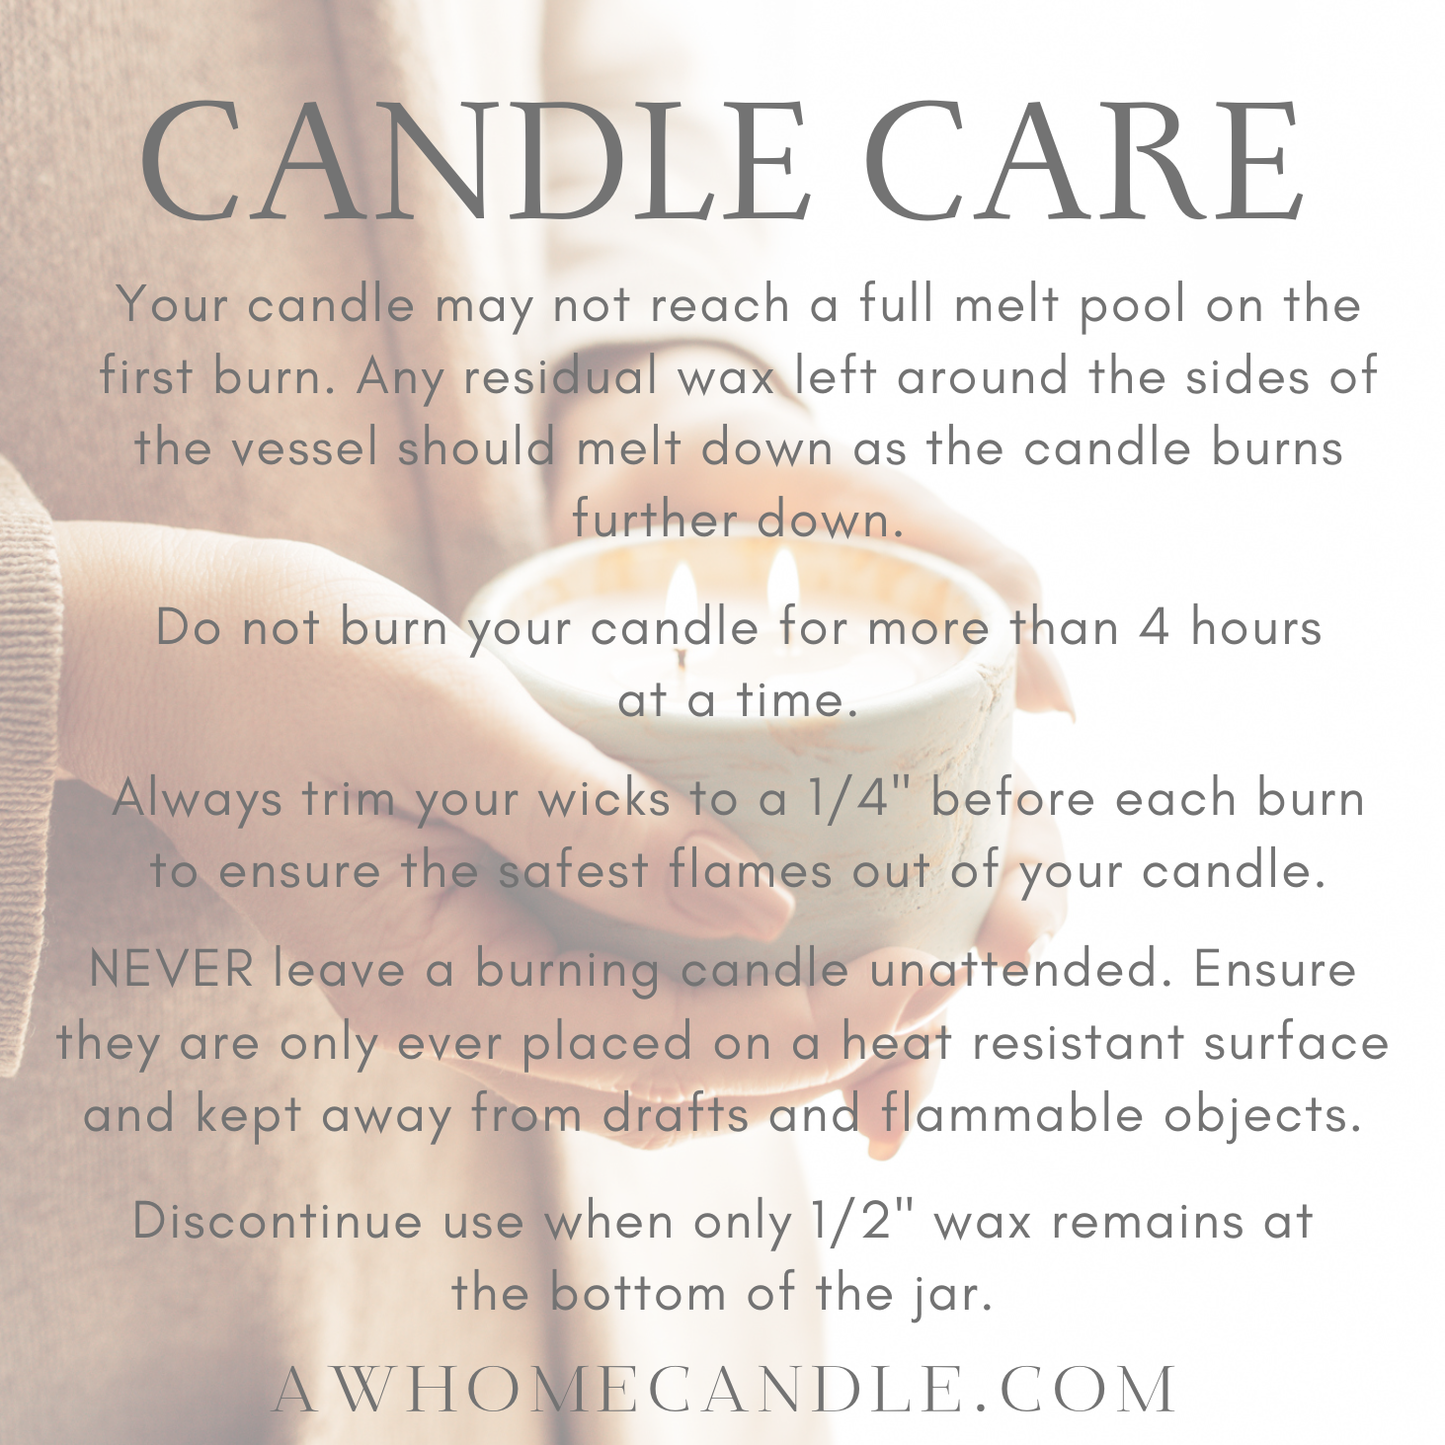 AW HOME candle co - HOTEL LOBBY Concrete Candle | Coconut wax | Luxury Candle